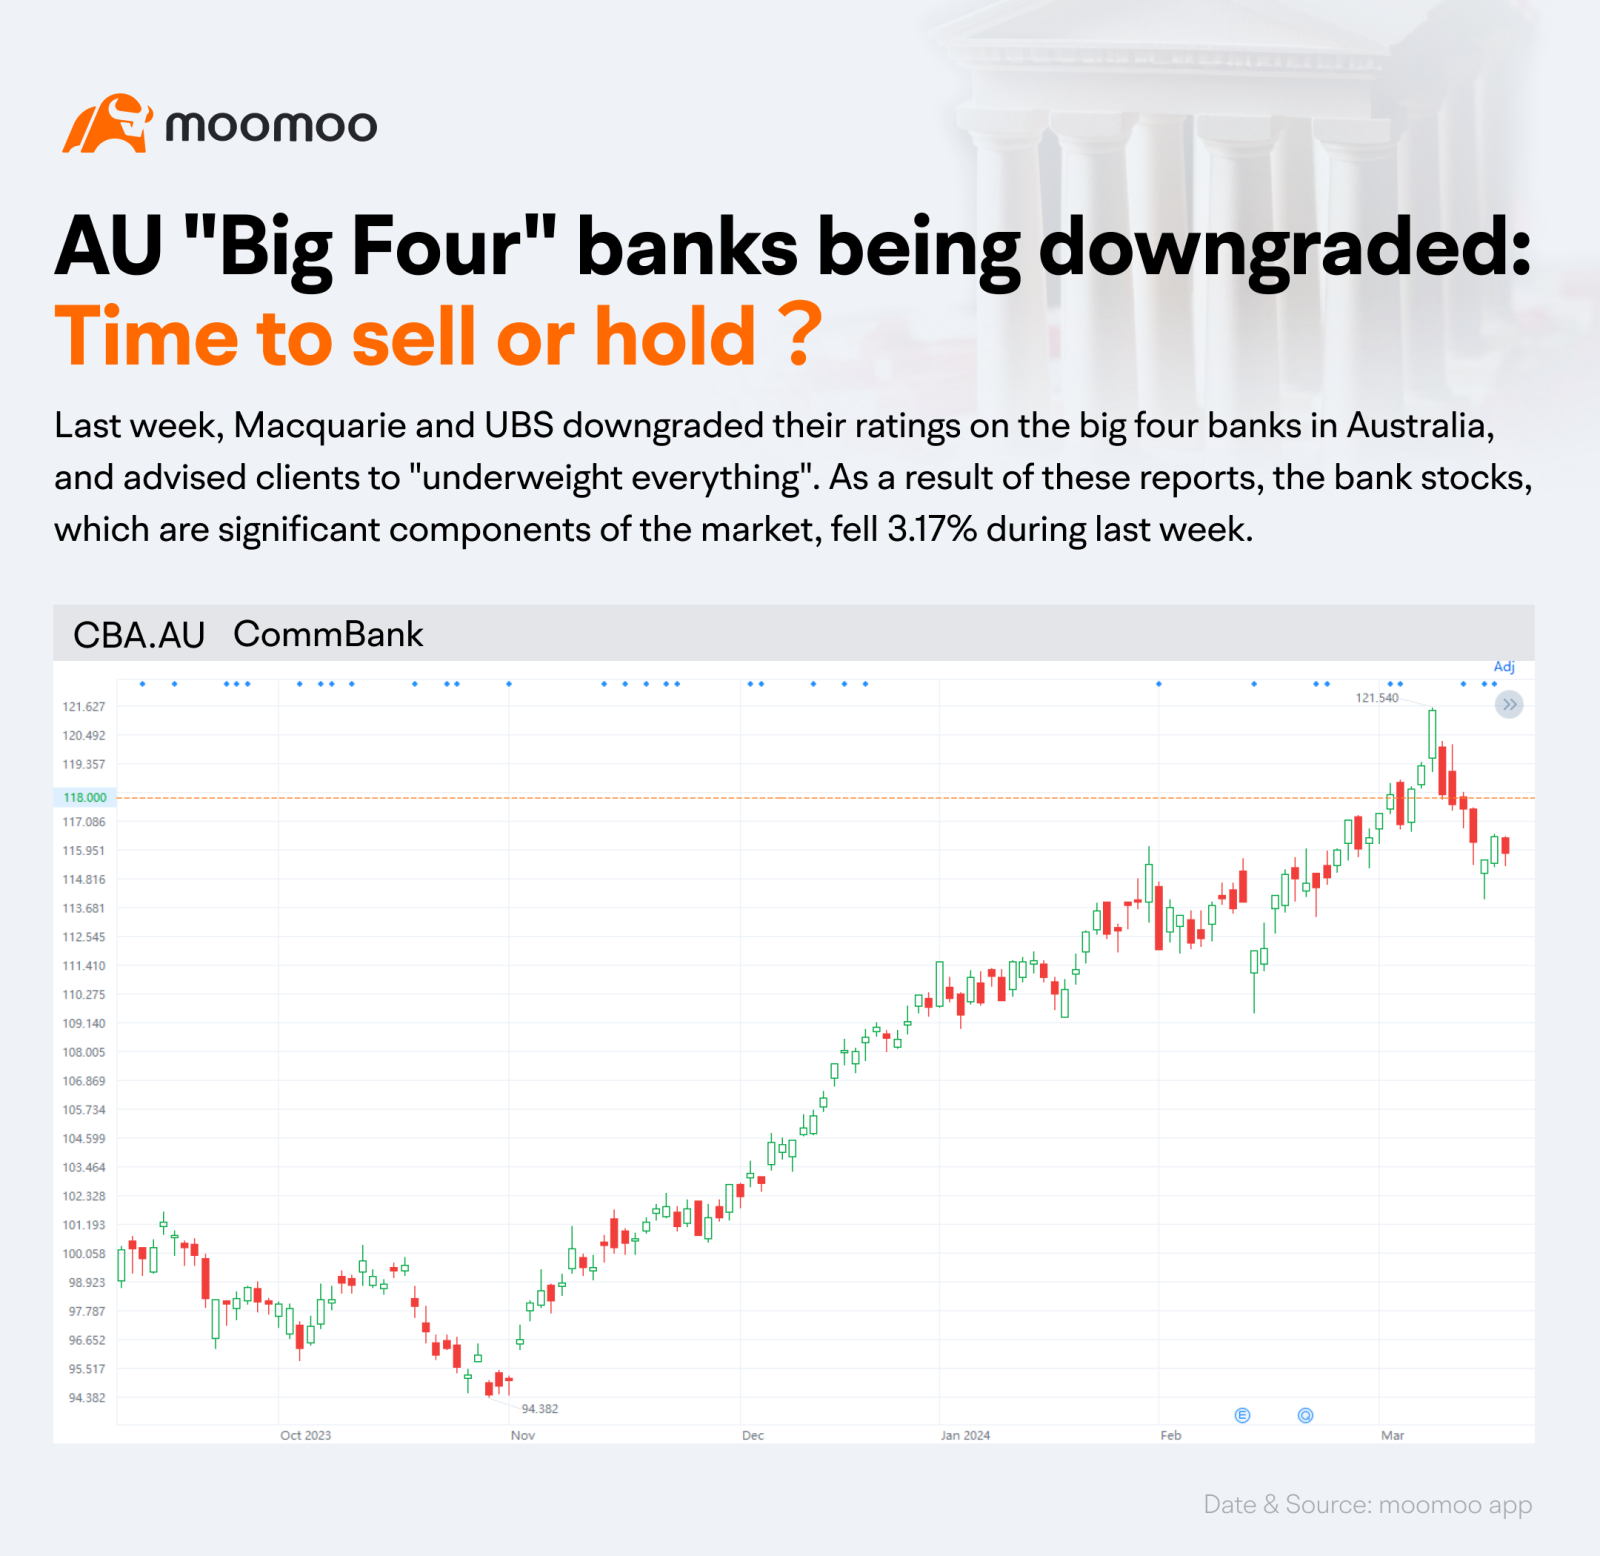 Weekly community Spotlights: Time to sell or hold AU"Big Four" banks？